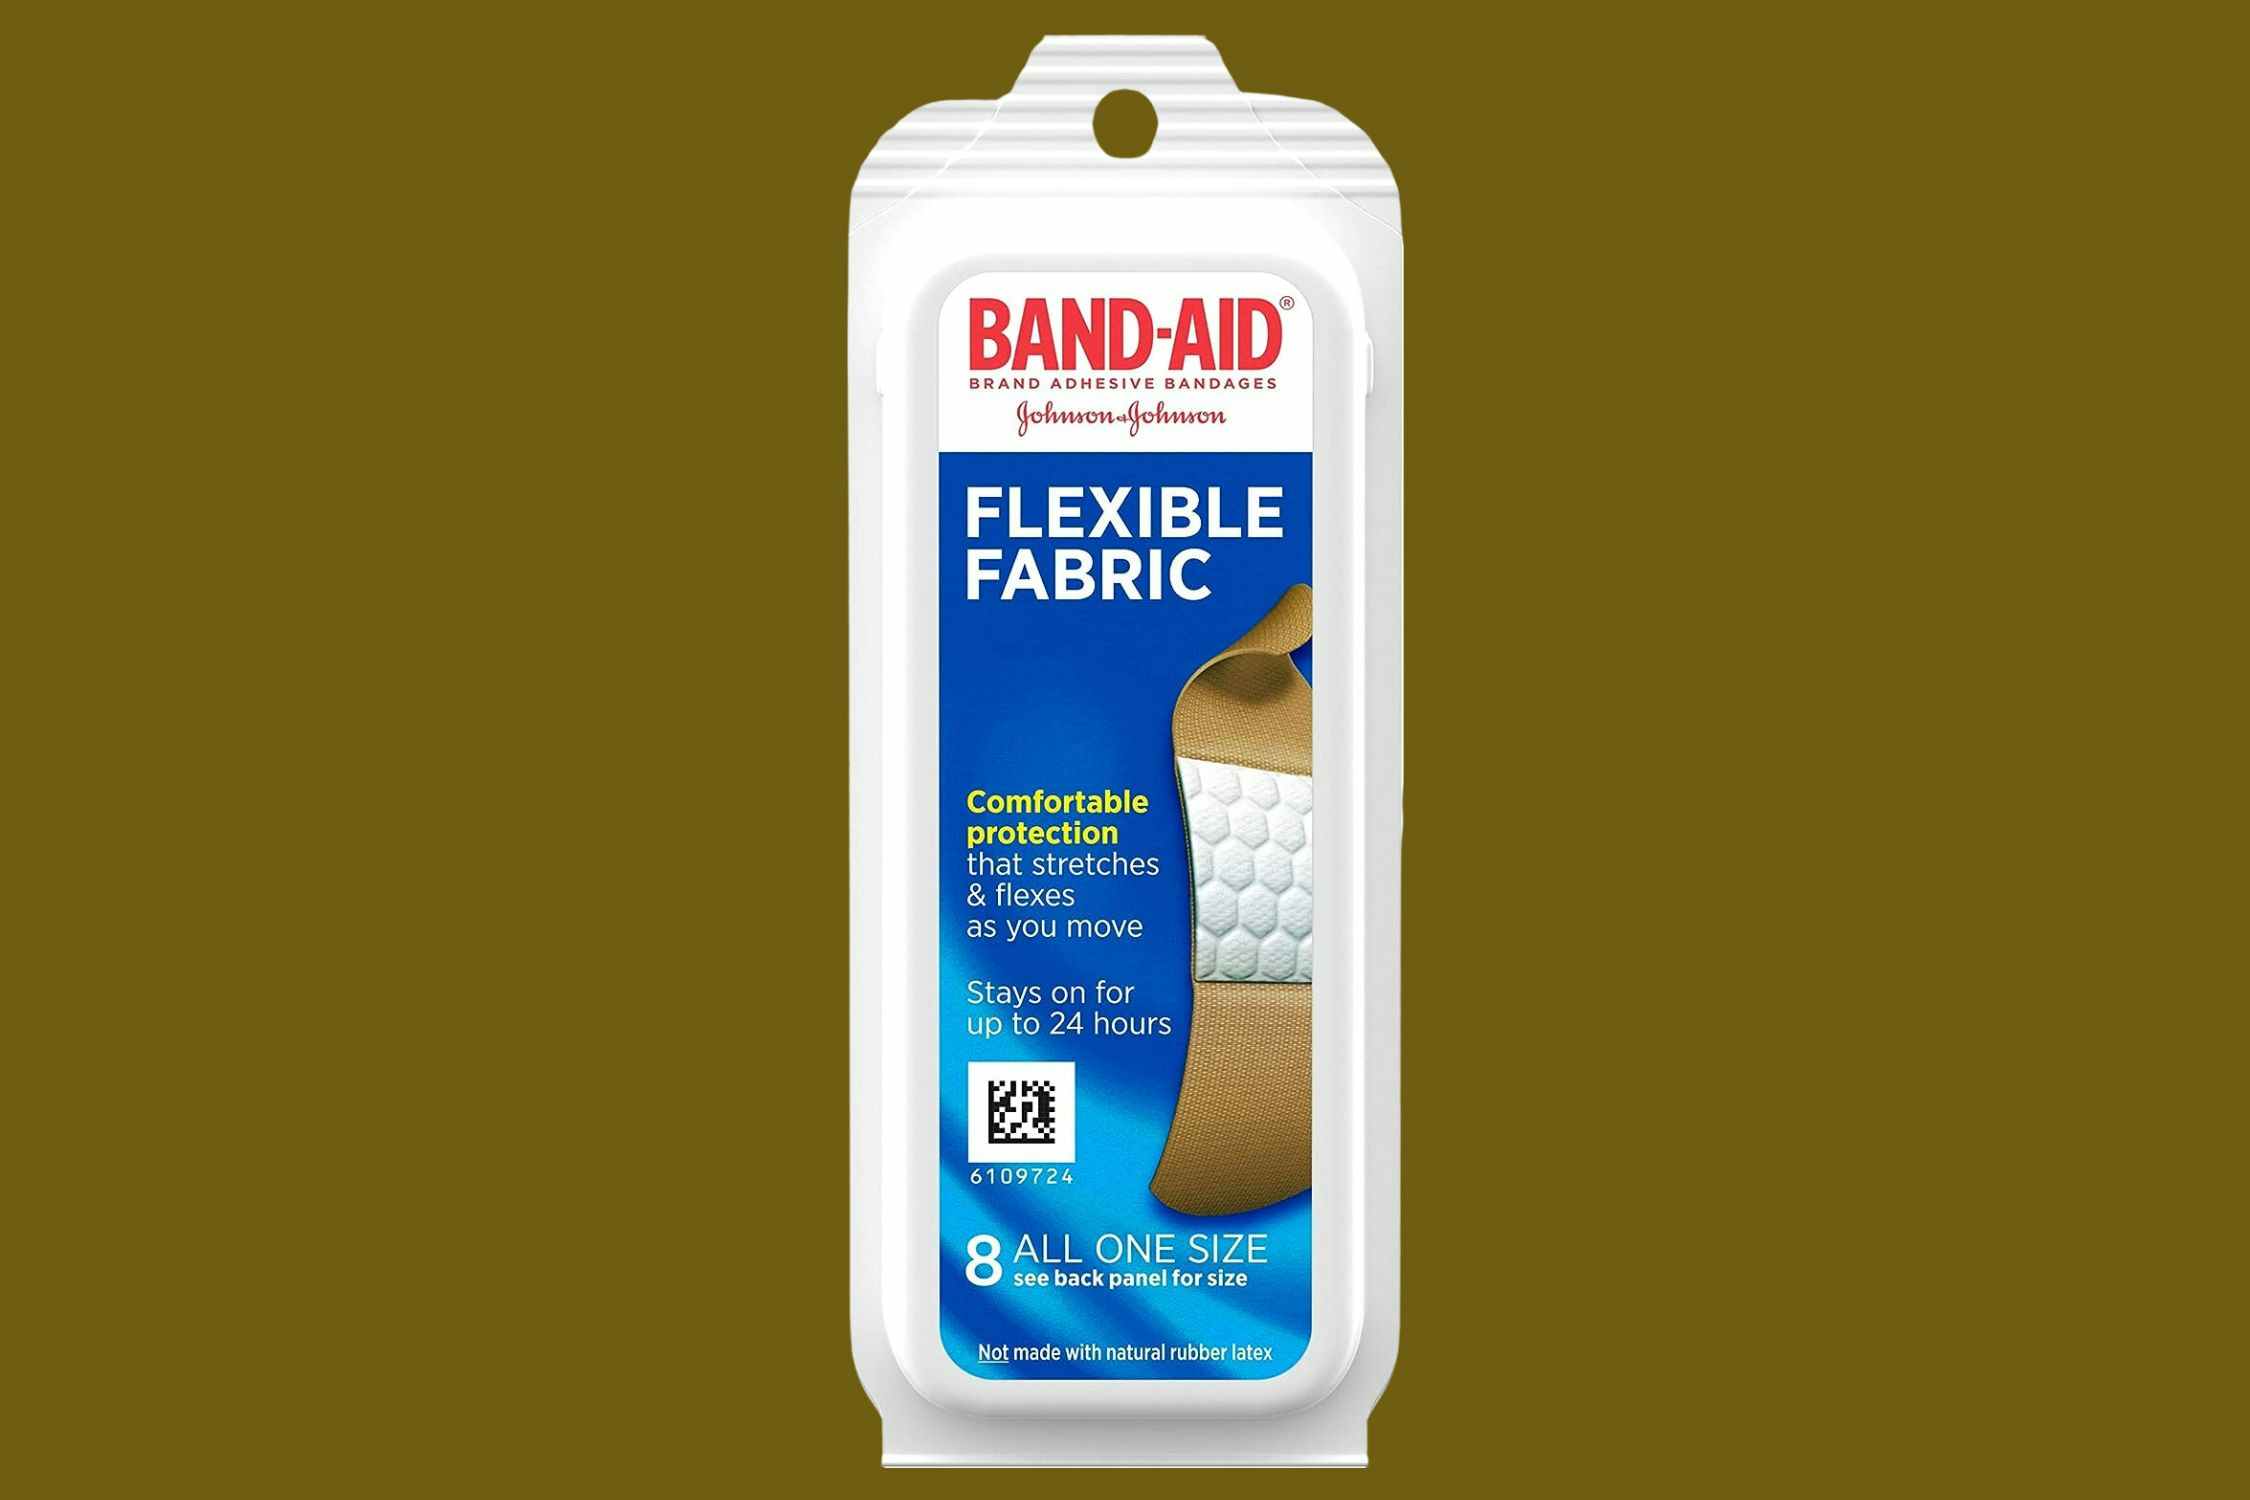 Band-Aid Fabric Bandages 8-Pack, as Low as $0.84 on Amazon